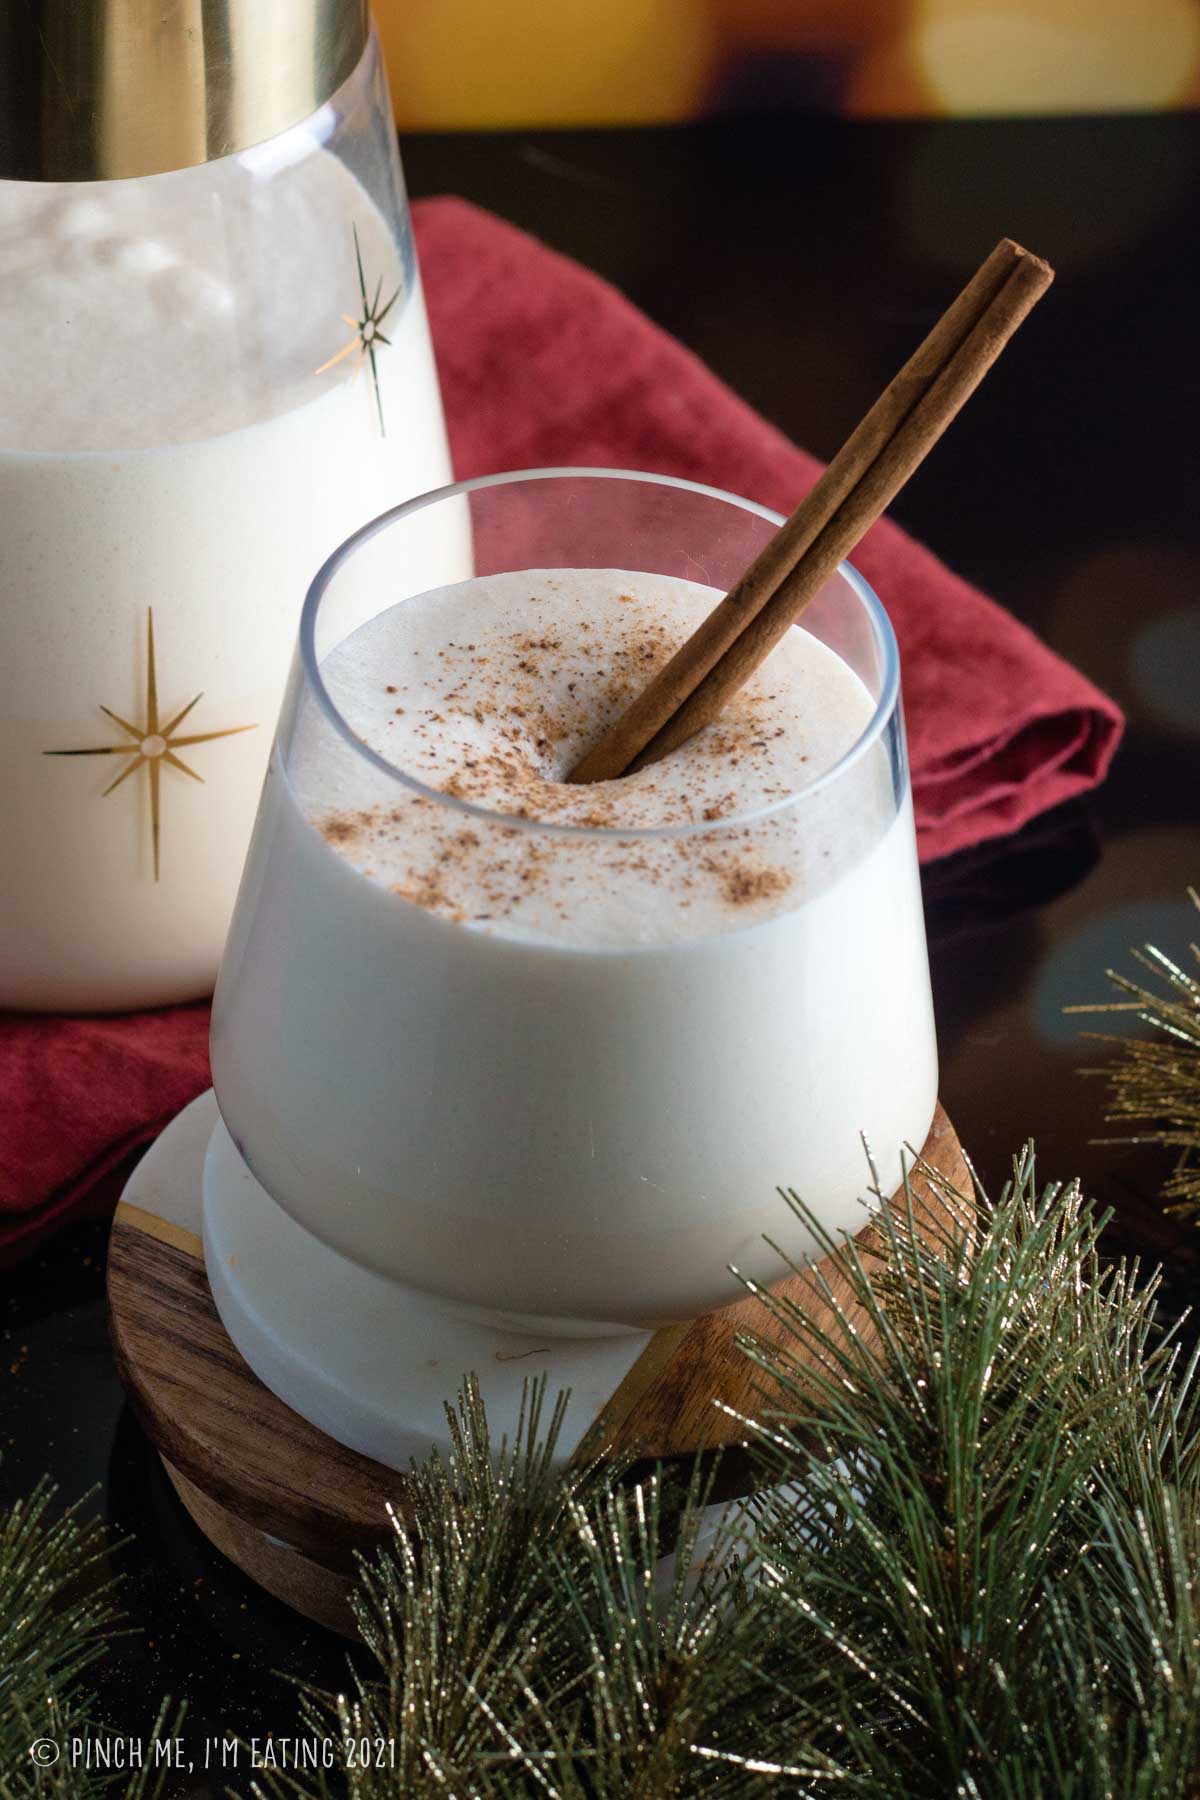 Glass of eggnog with cinnamon stick, topped with ground nutmeg, with pitcher in the background.